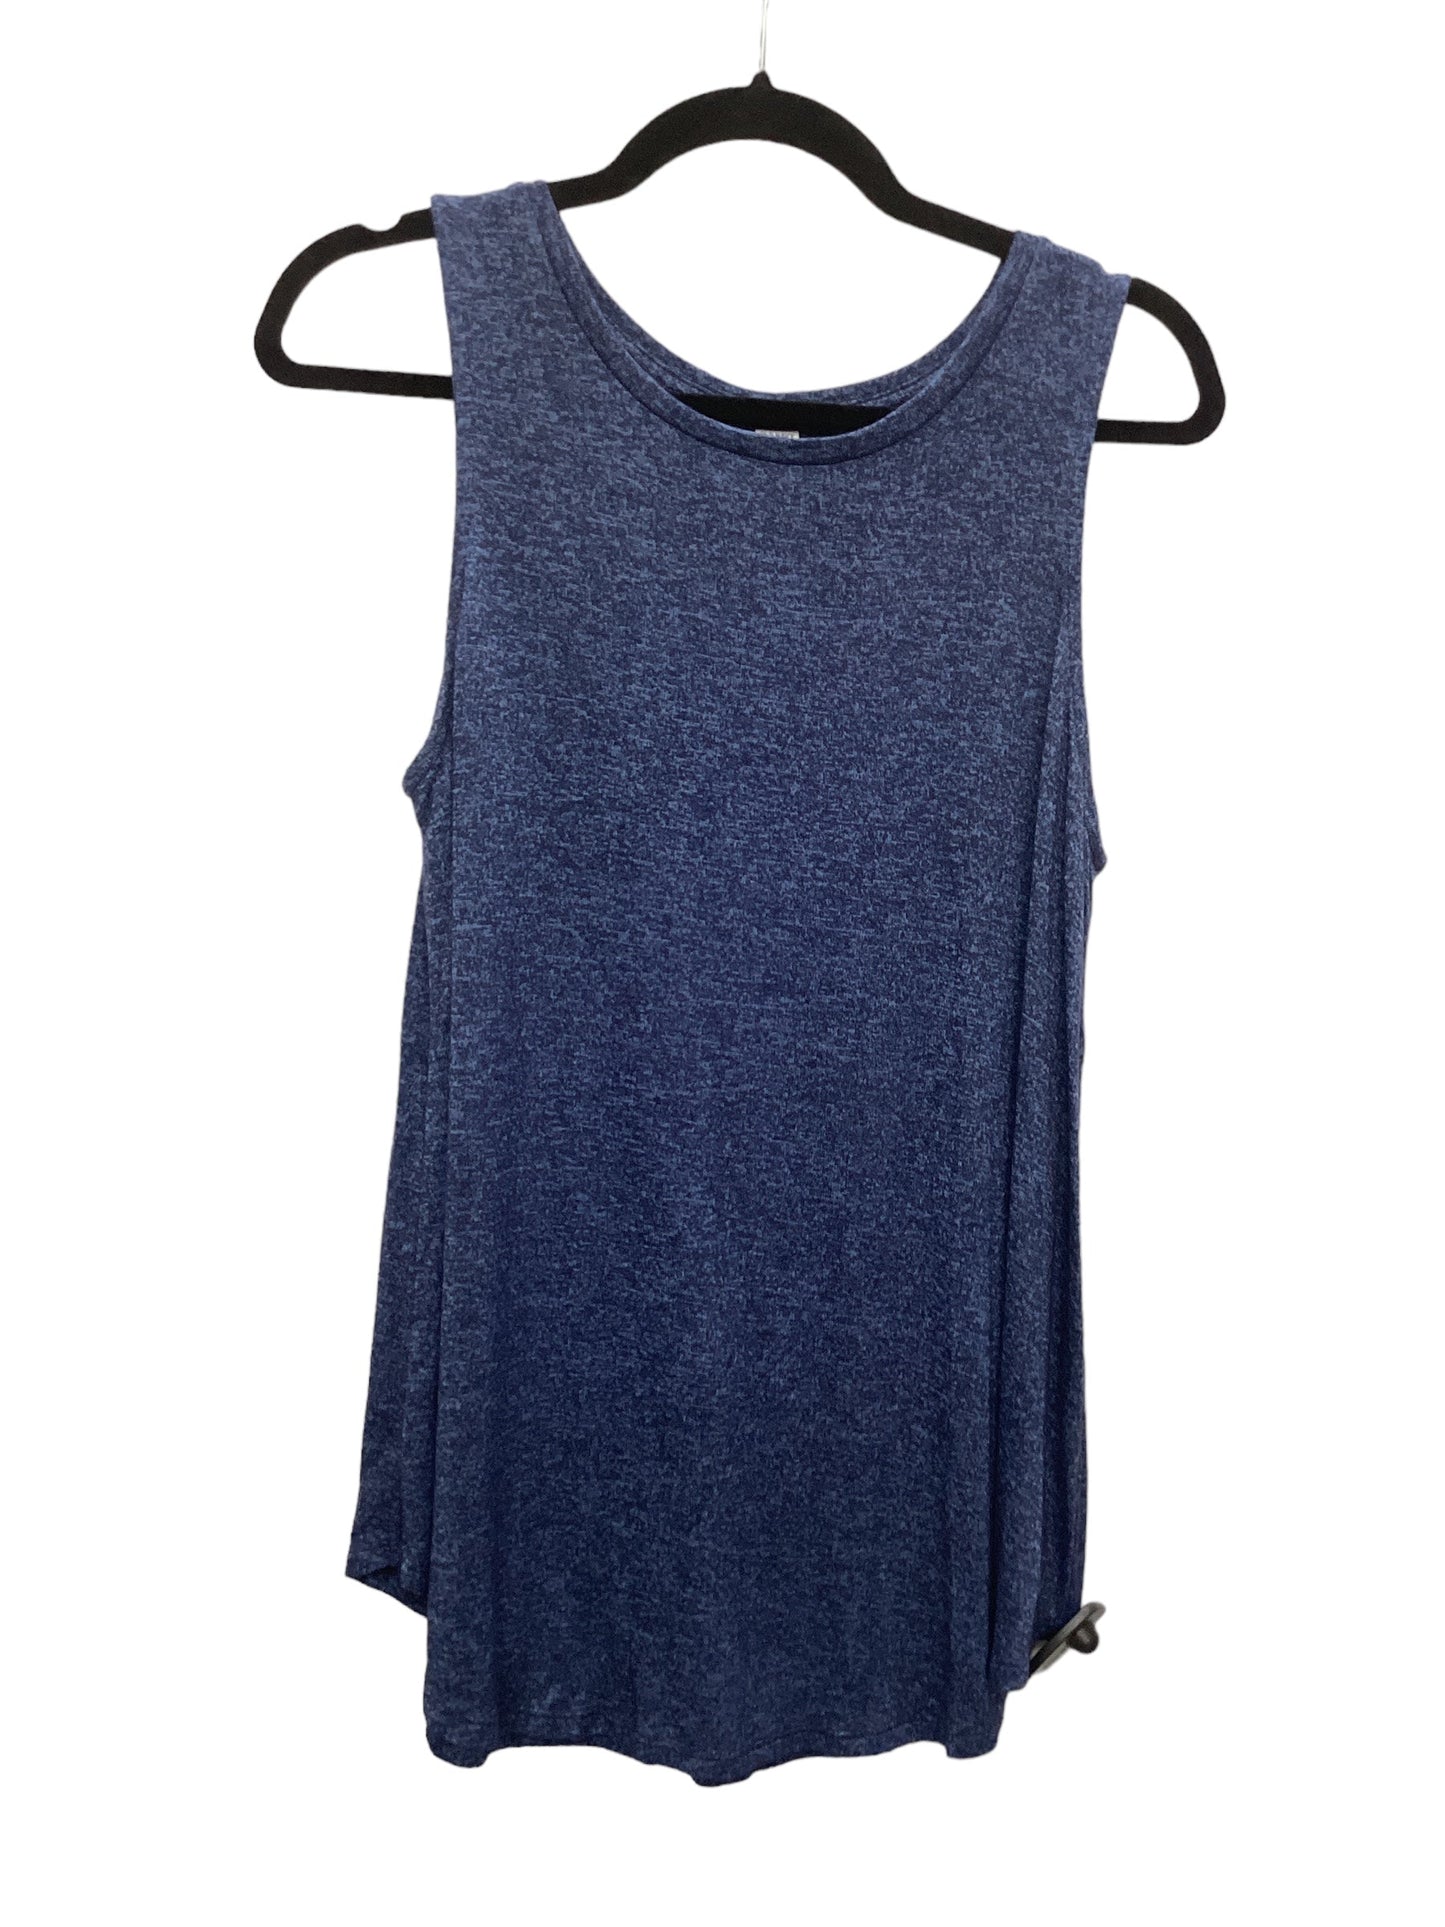 Blue Tank Top Old Navy, Size S